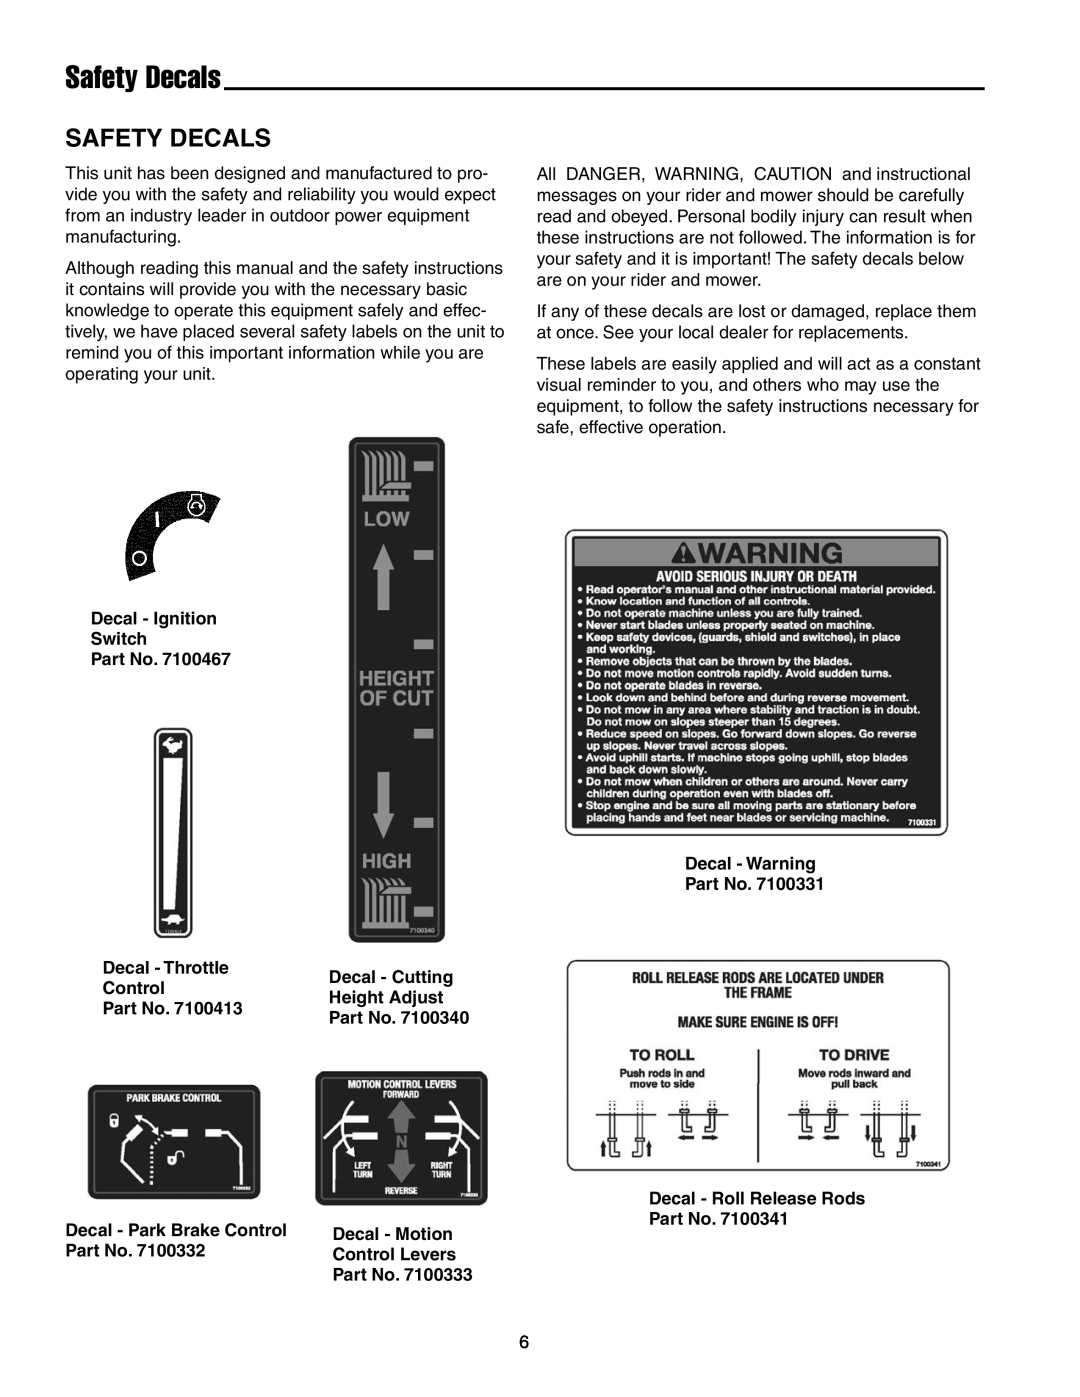 Snapper RZT20440BVE2 Safety Decals, Decal - Ignition Switch, Decal - Throttle Control, Decal - Park Brake Control Part No 